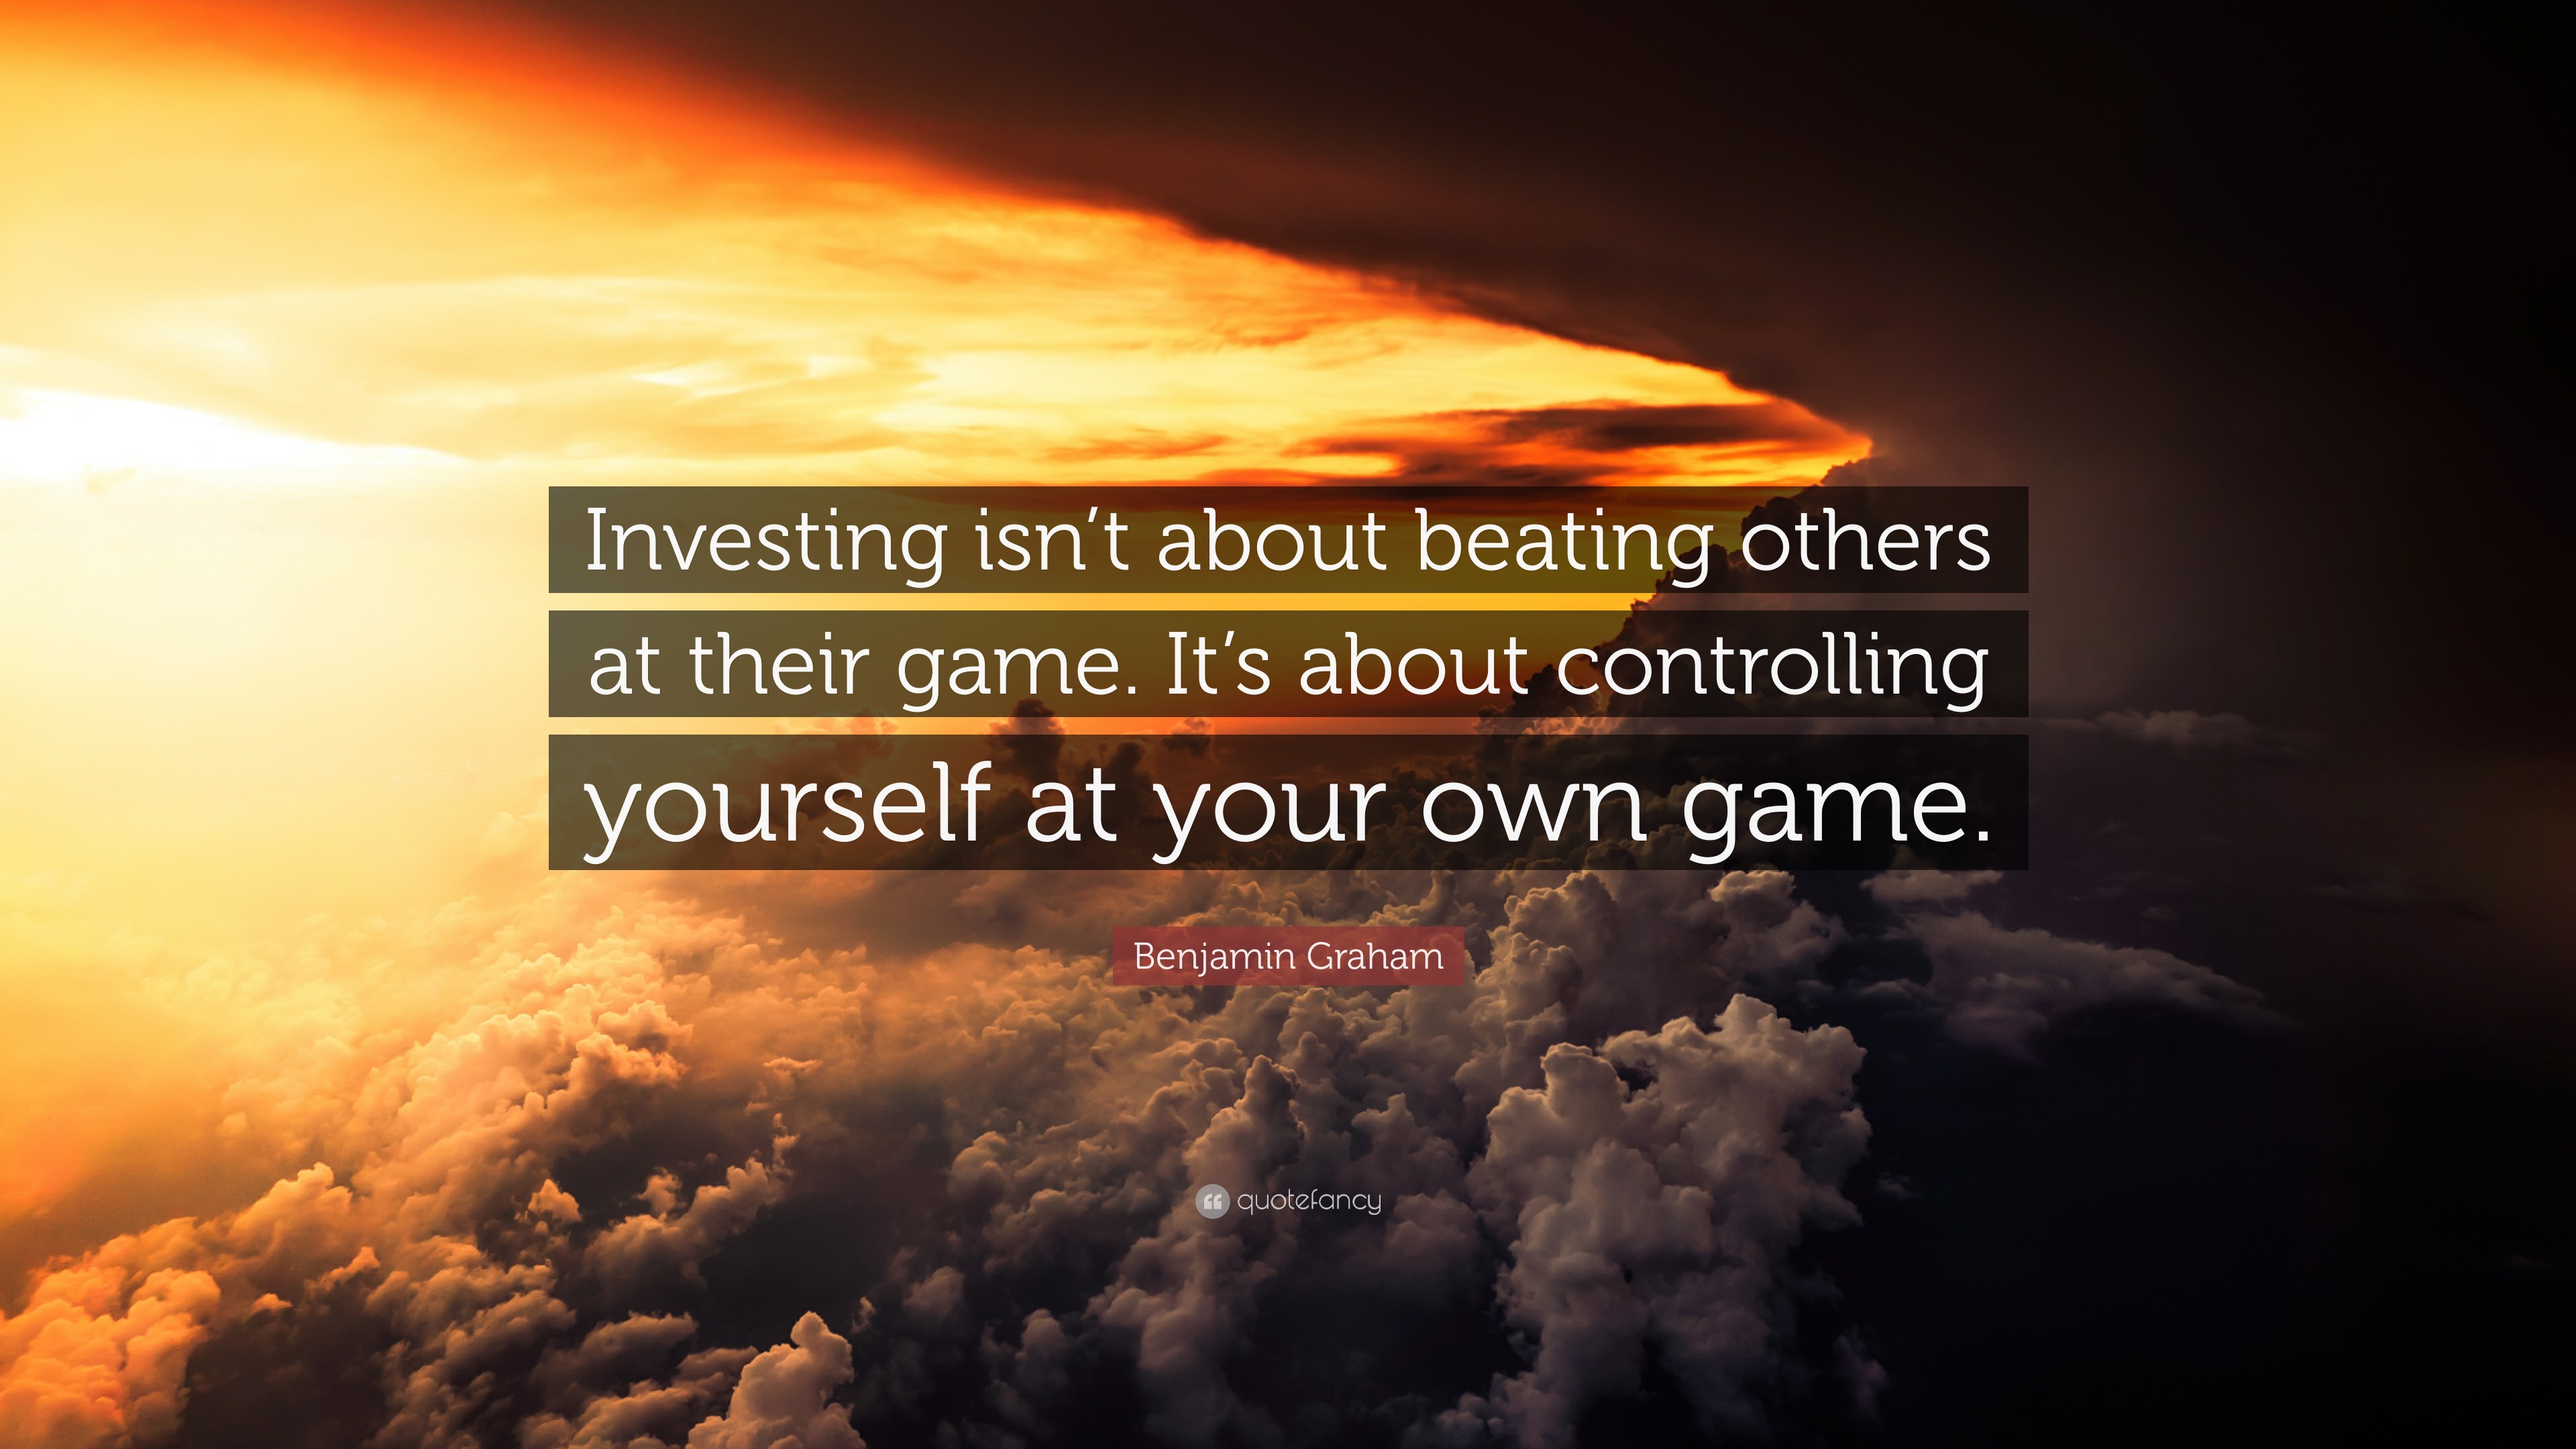 Benjamin Graham Quote “Investing isn’t about beating